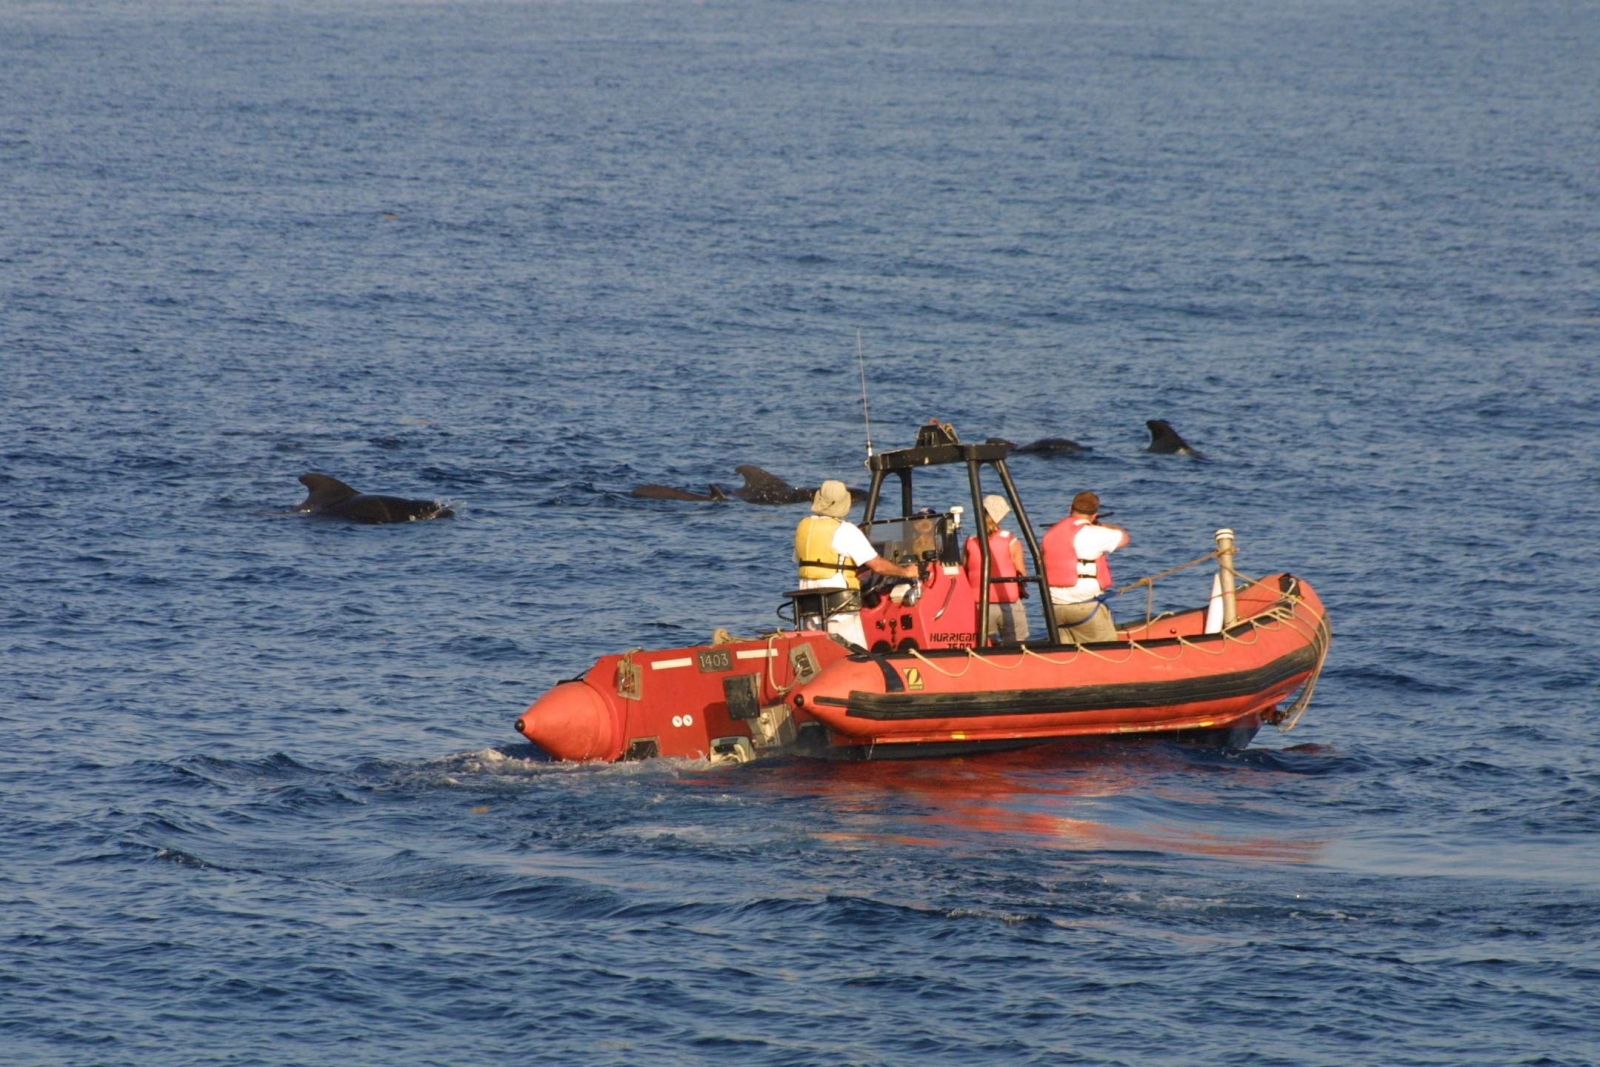 A group of people on a boat pointing a crossbow like instrument at a group of whales.